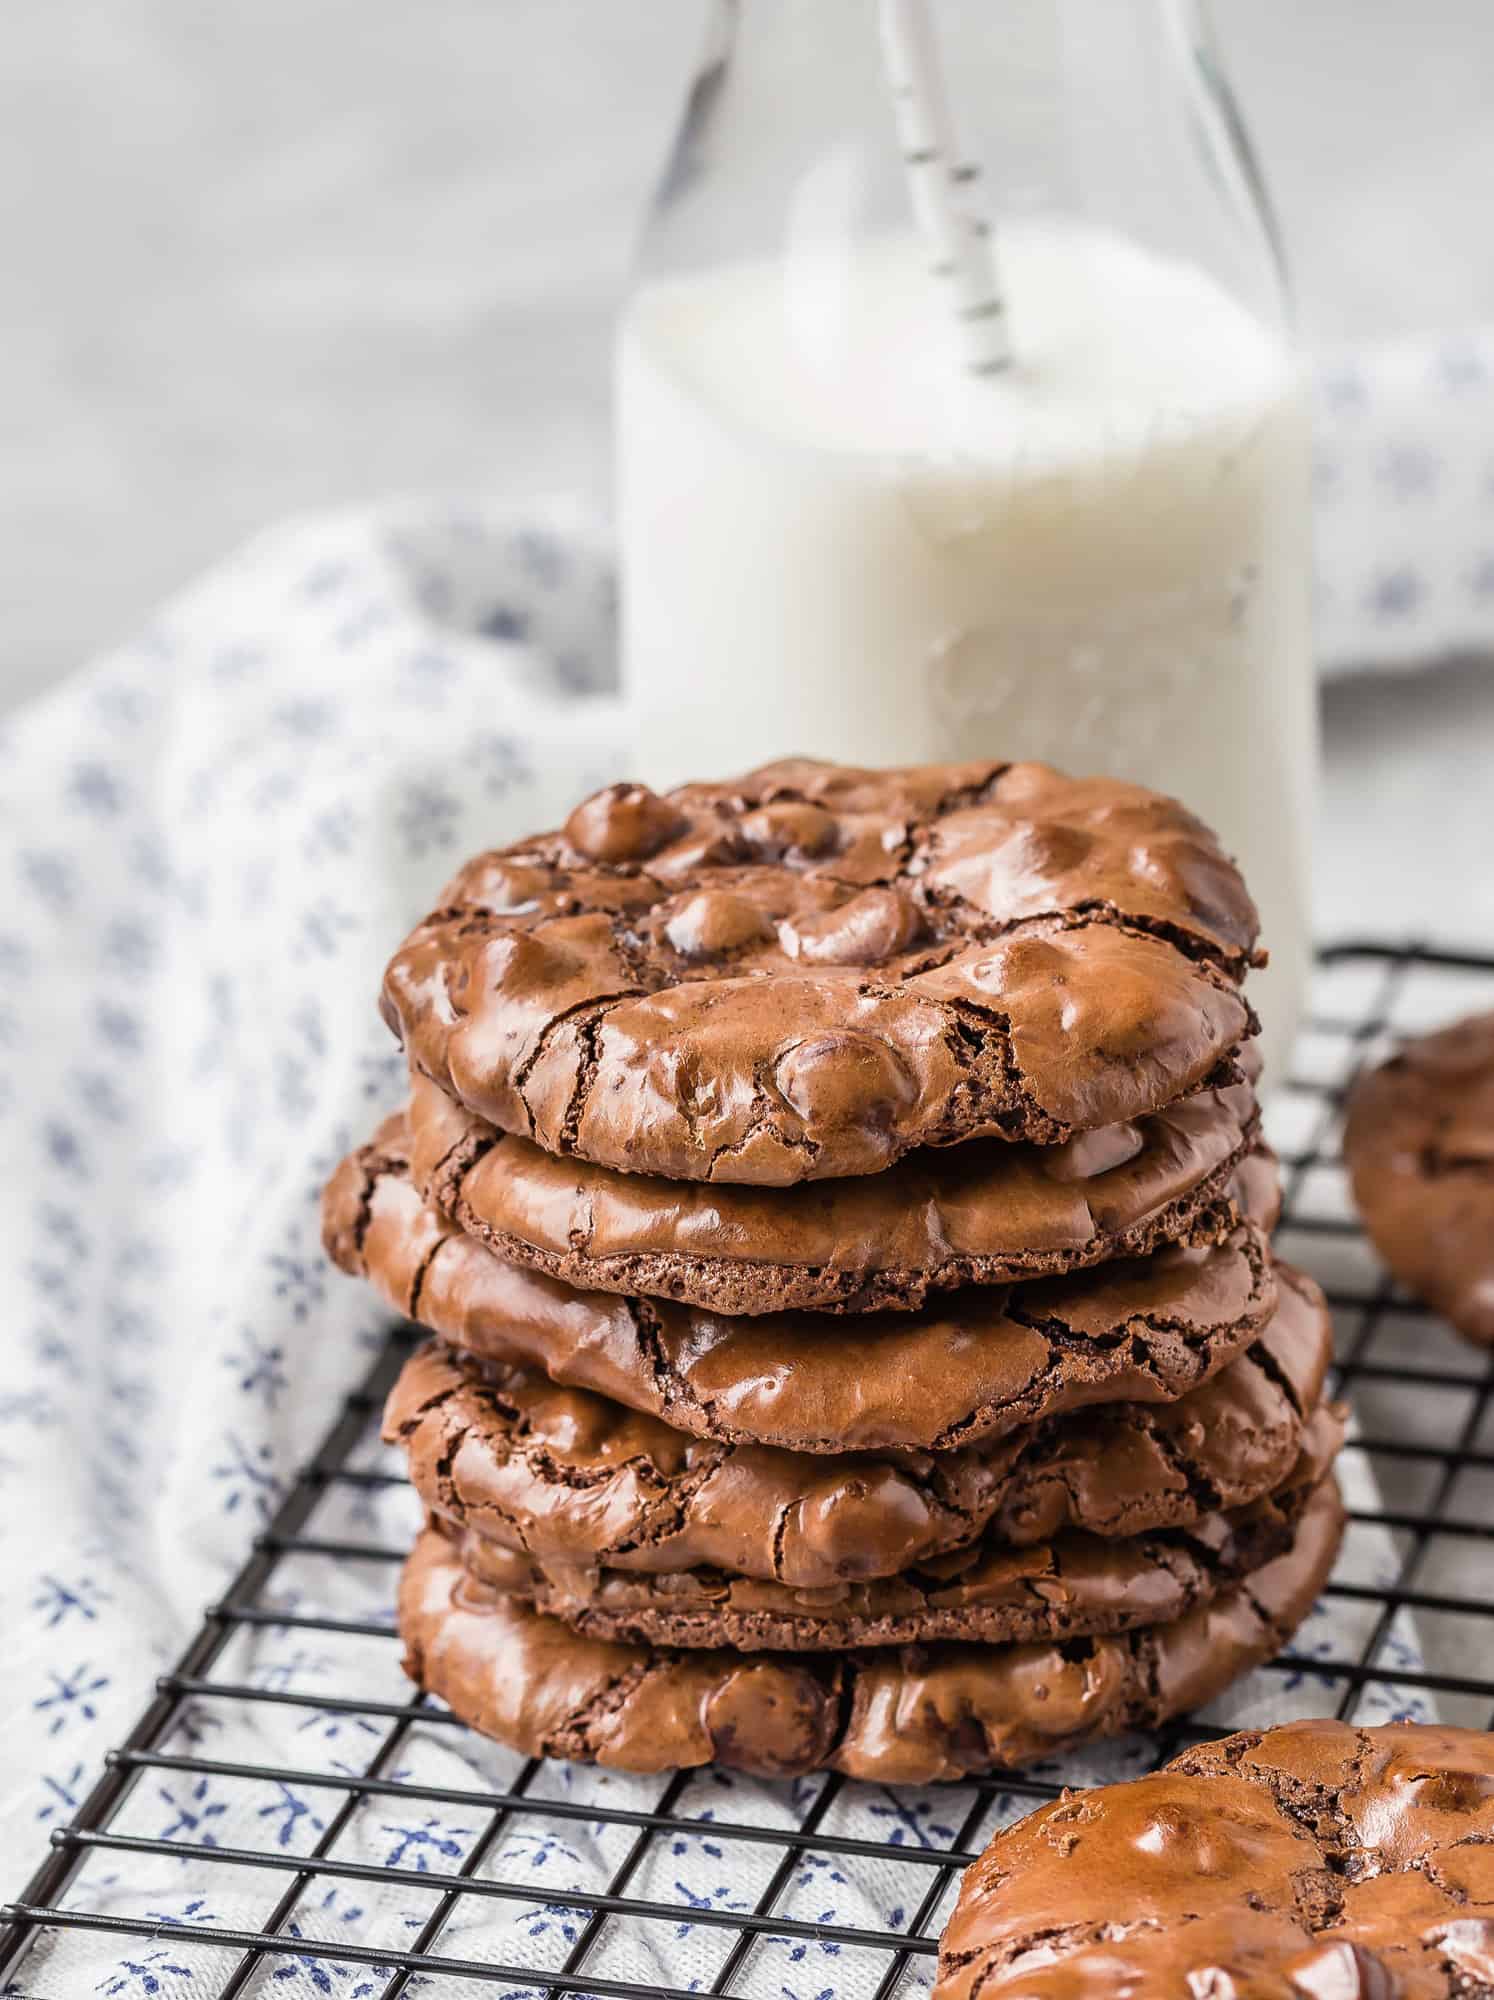 Stack of chocolate cookies, milk in background.